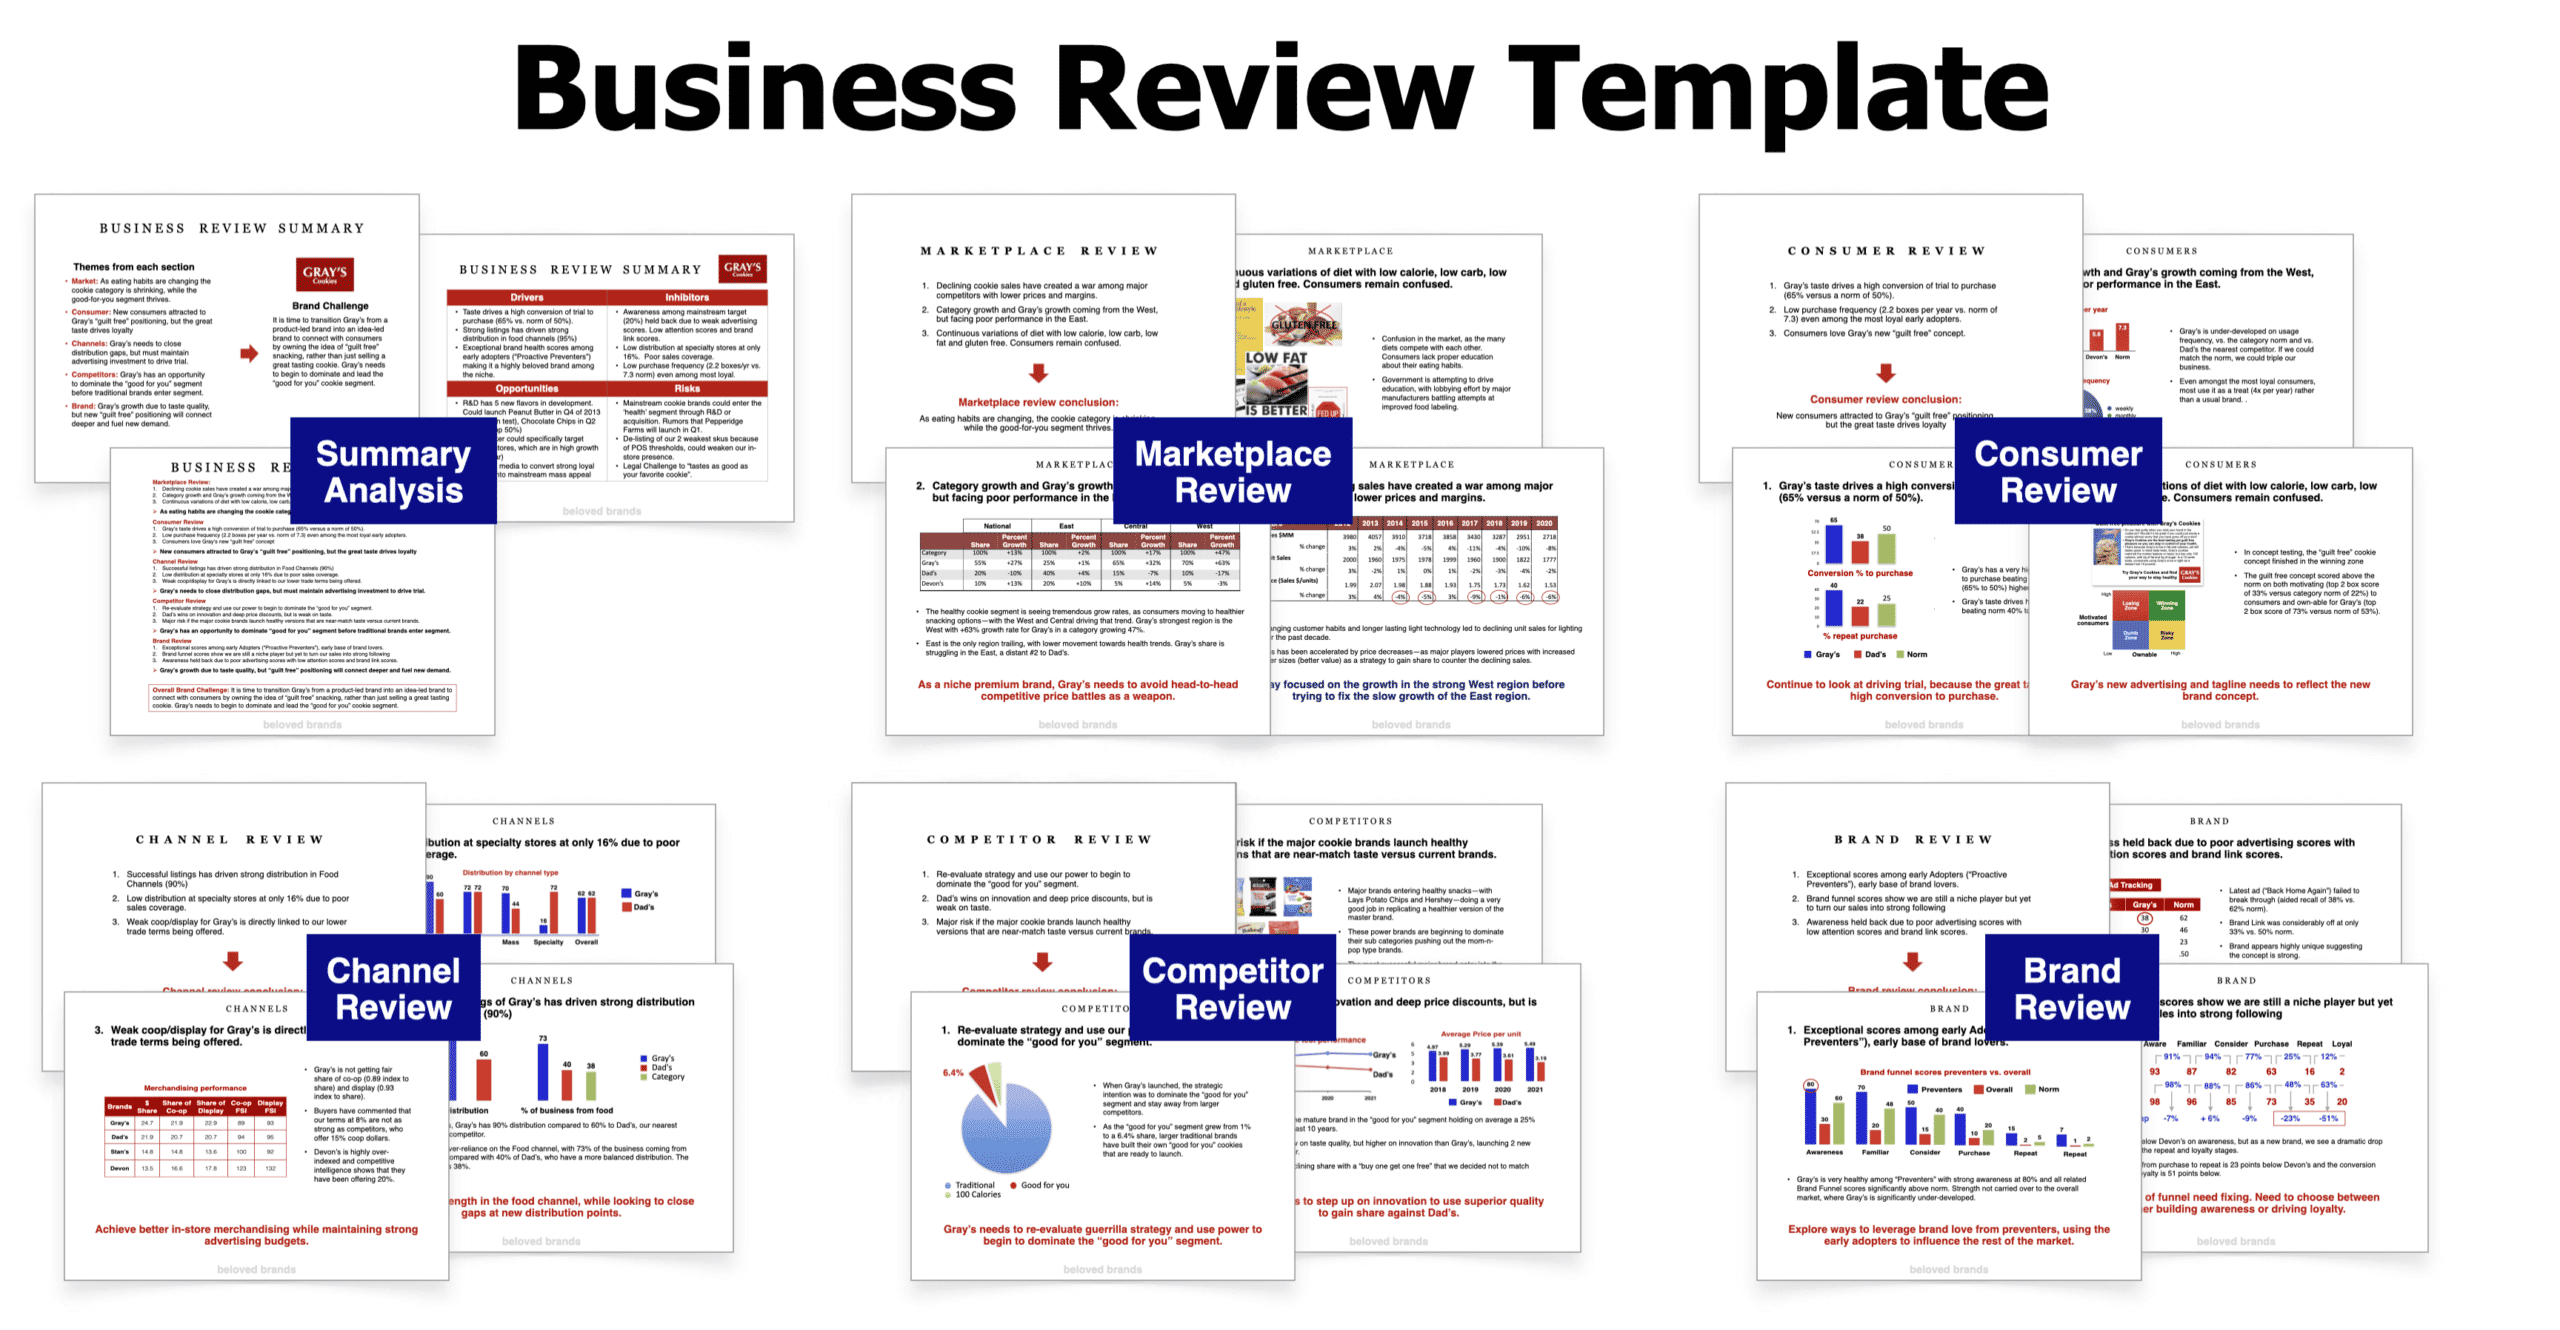 Business Review Template for Brand Toolkit